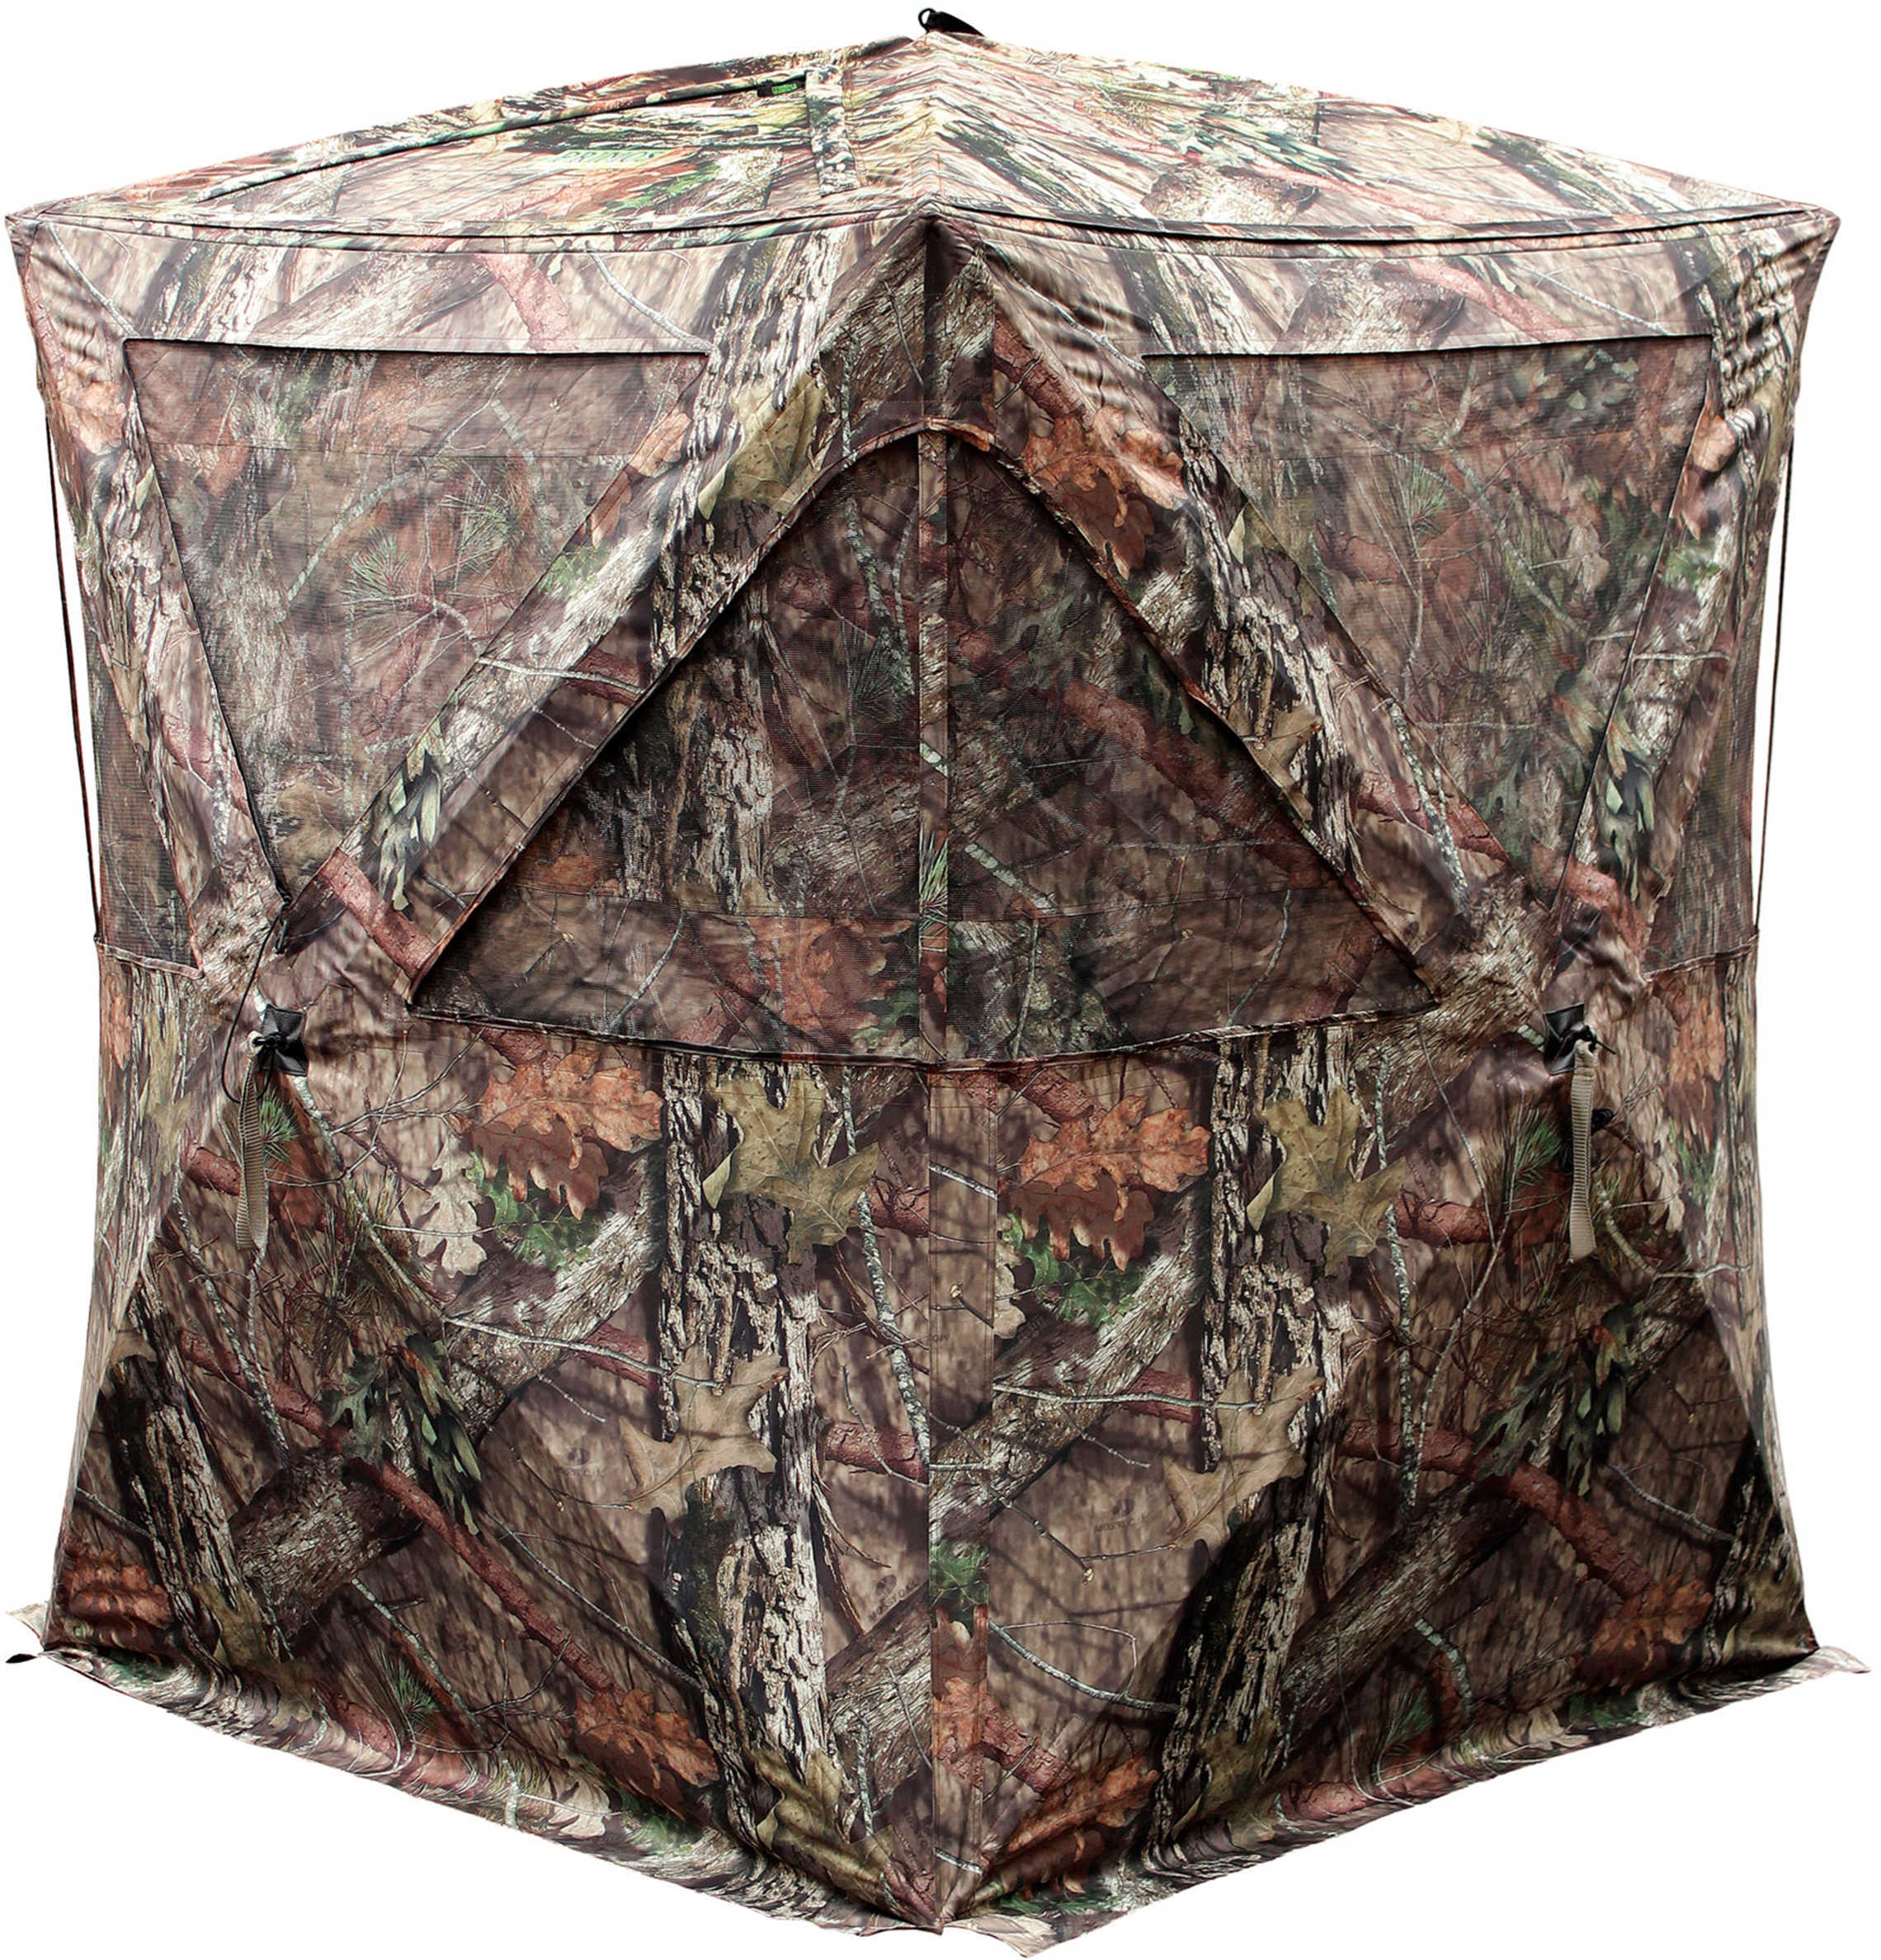 Primos Club 2x-Large, Mossy Oak Break-Up Country Hunting Blind Md: 65108